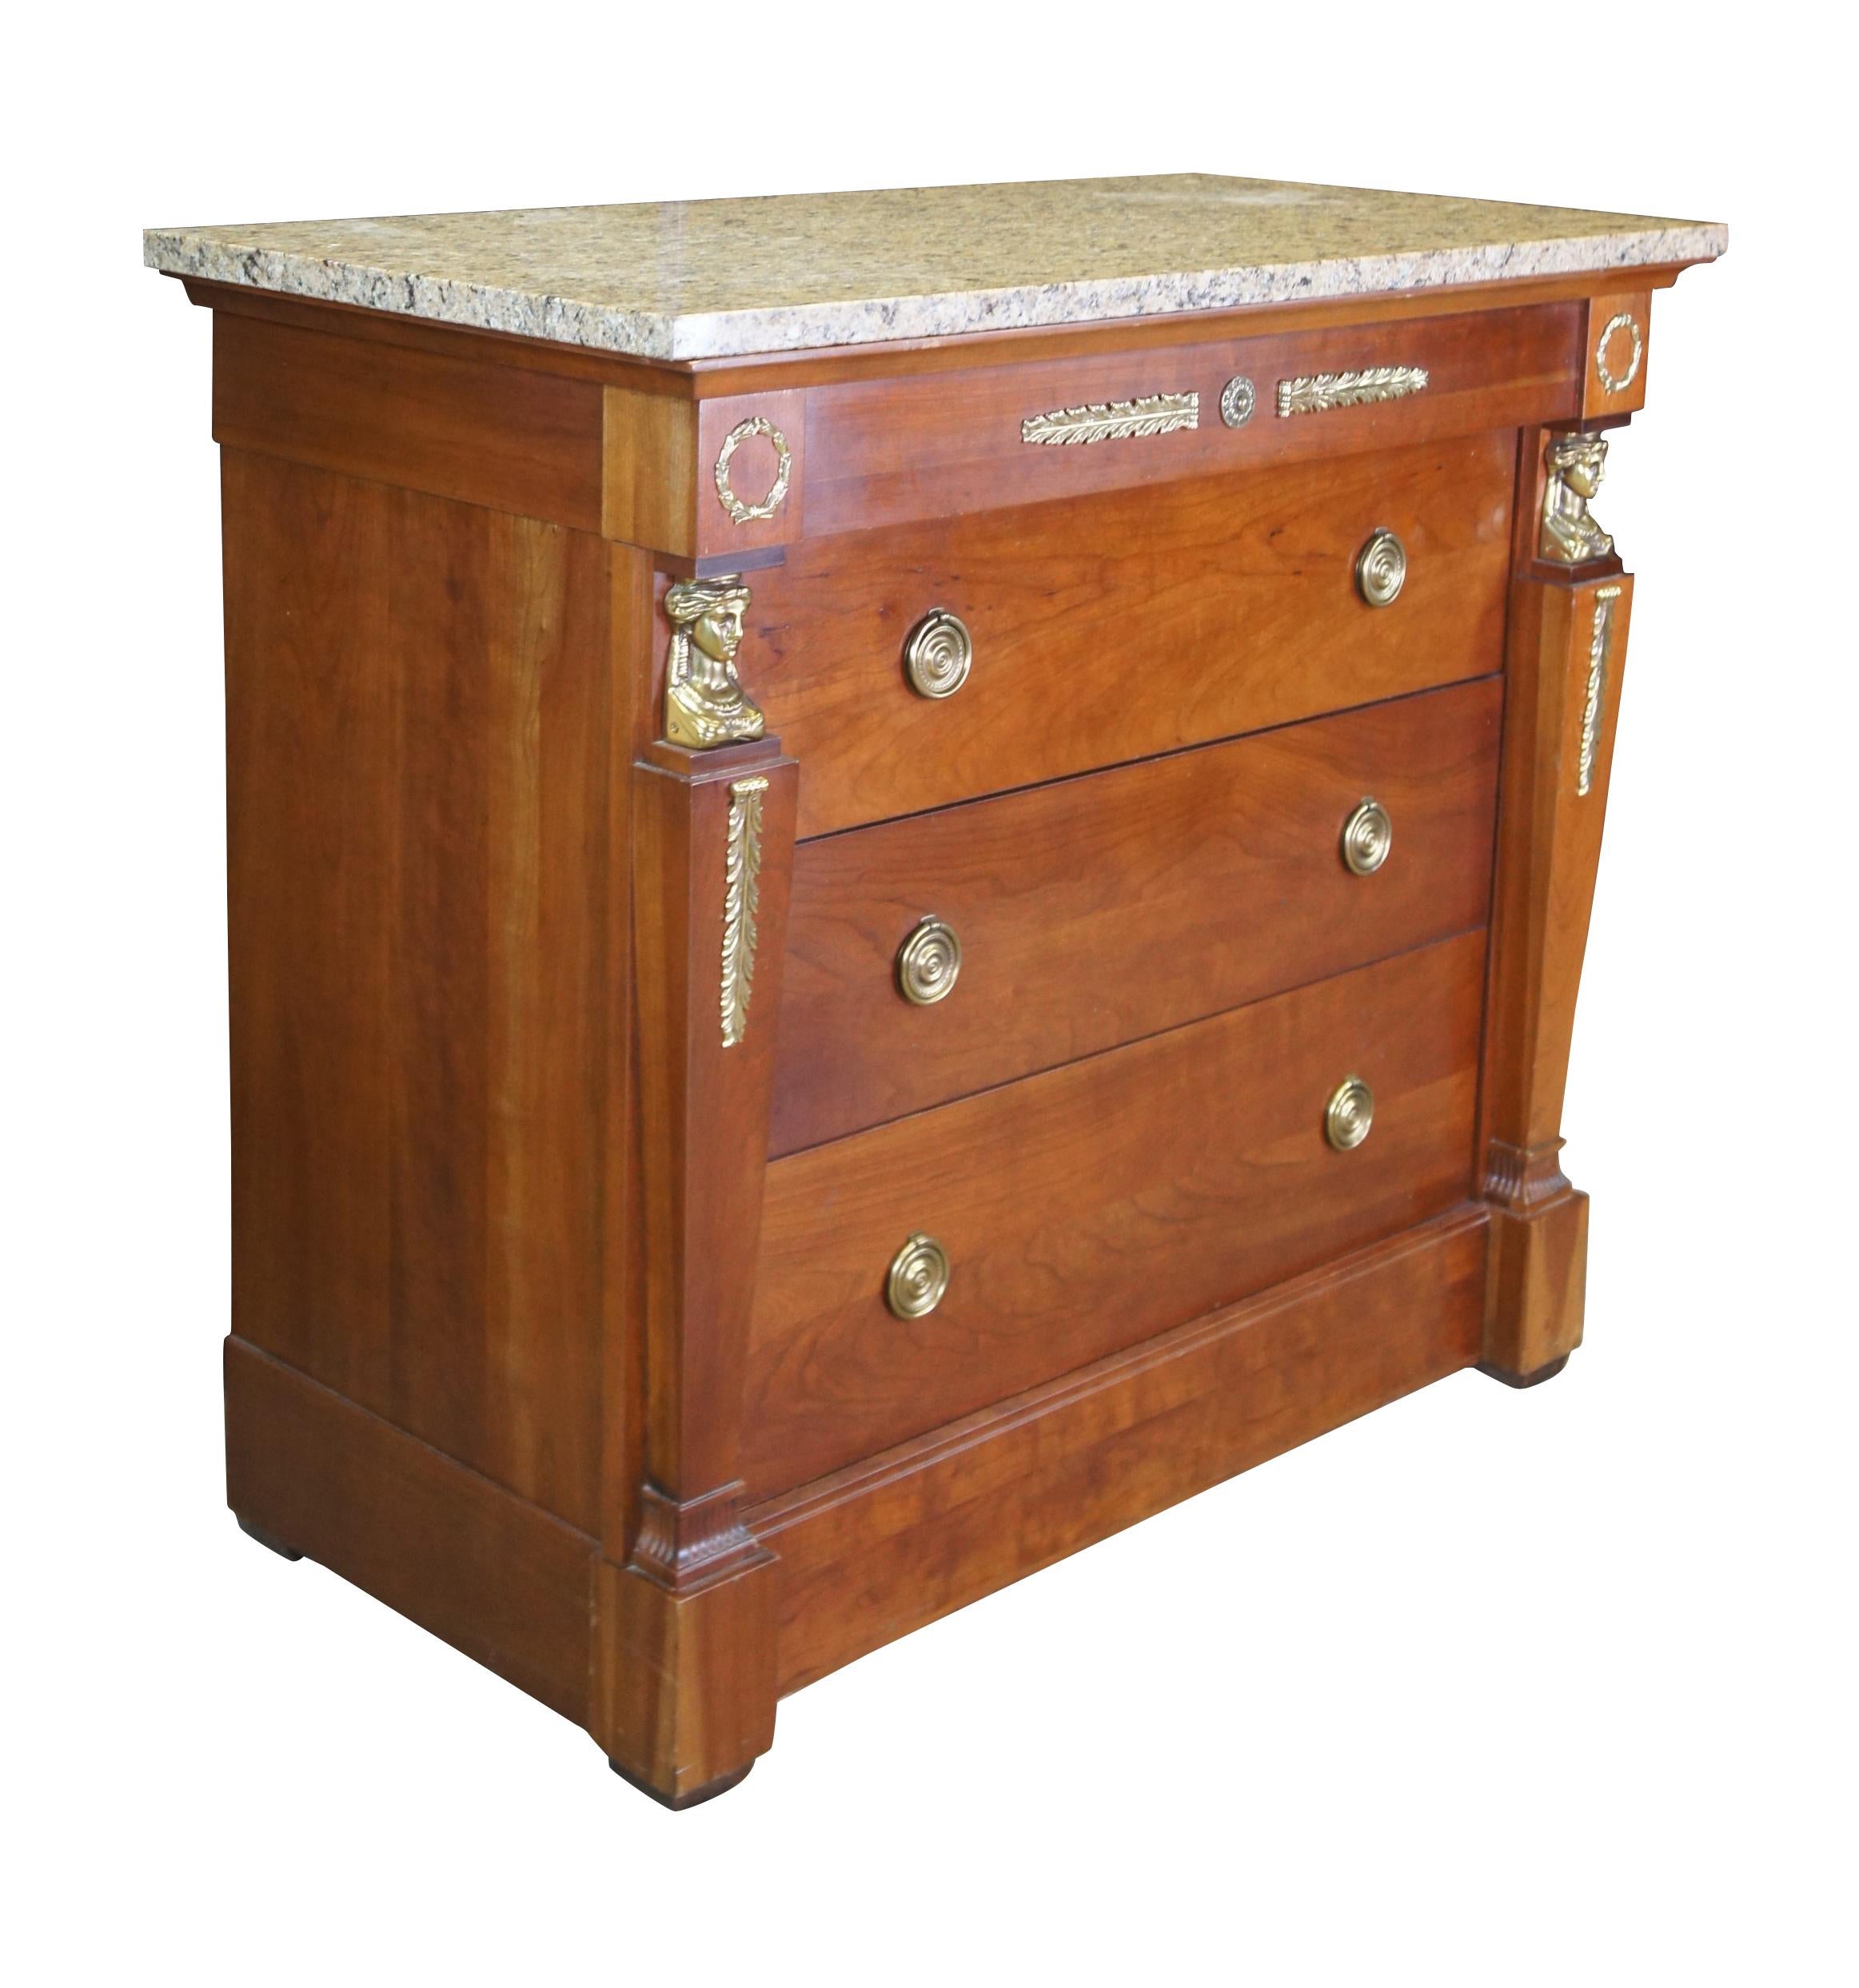 2 Harden French Empire Egyptian Revival Cherry Marble Nightstands Commodes Chest In Good Condition For Sale In Dayton, OH